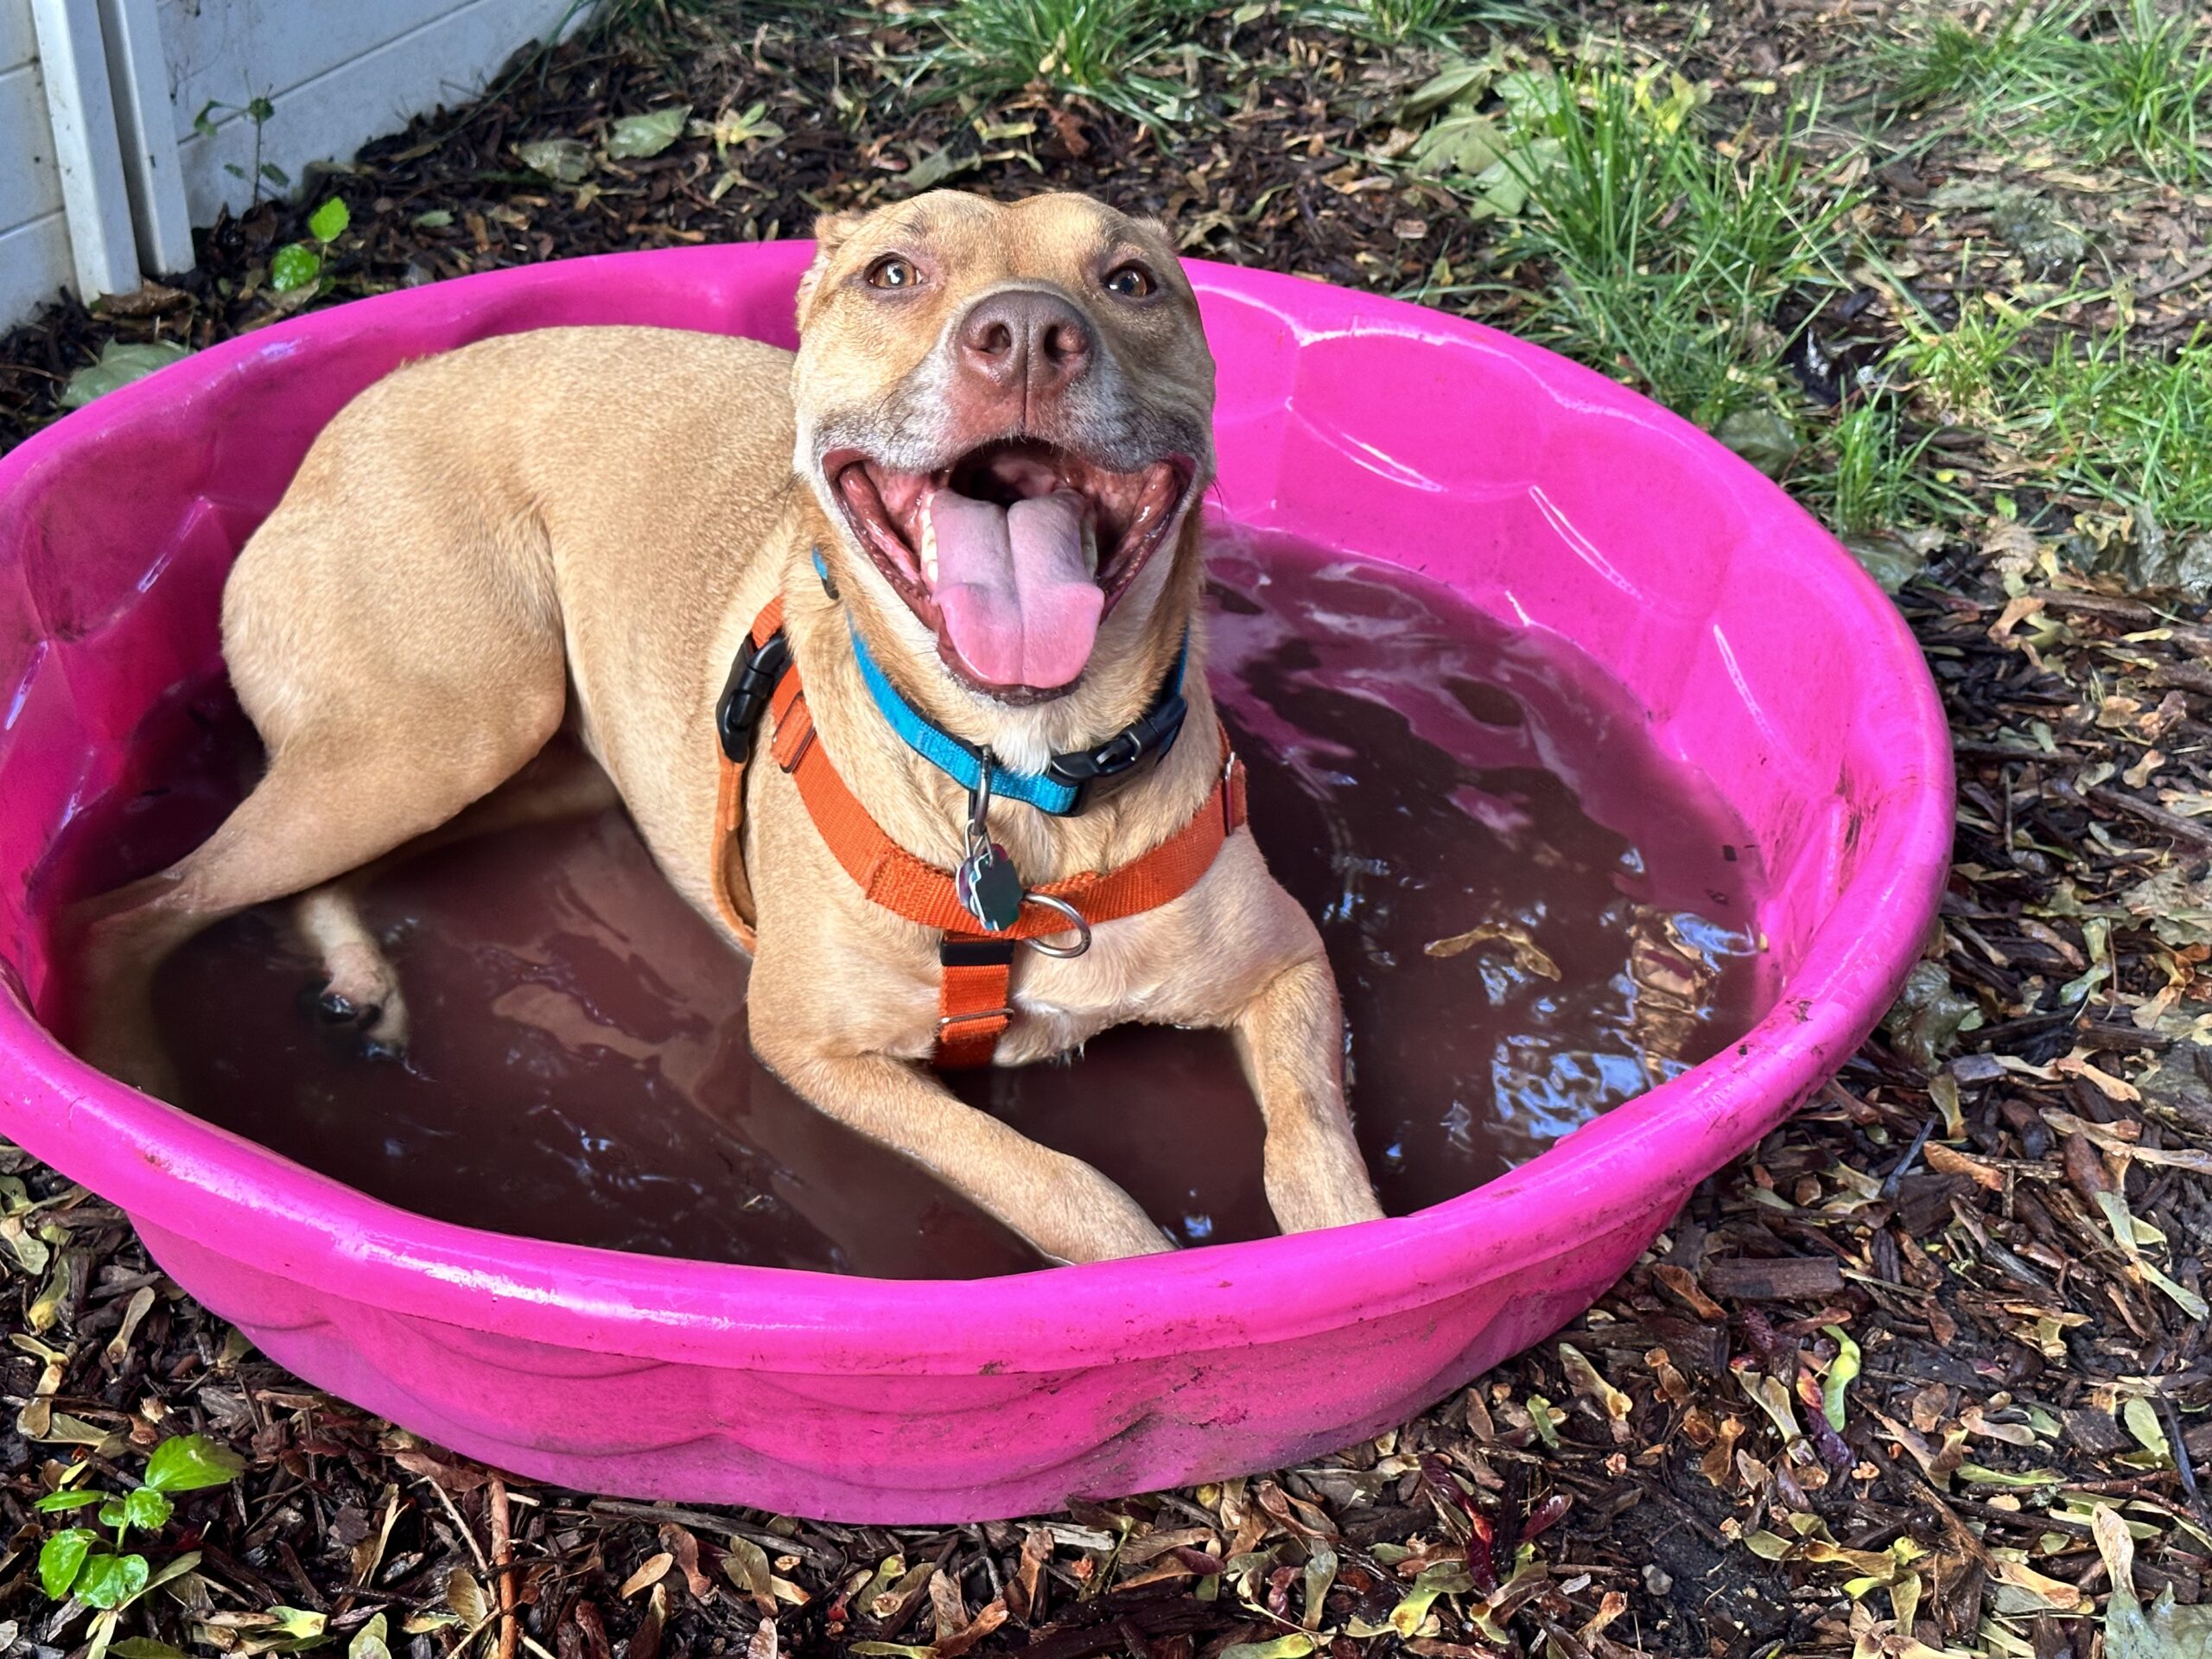 Miso the dog in a pink wading pool